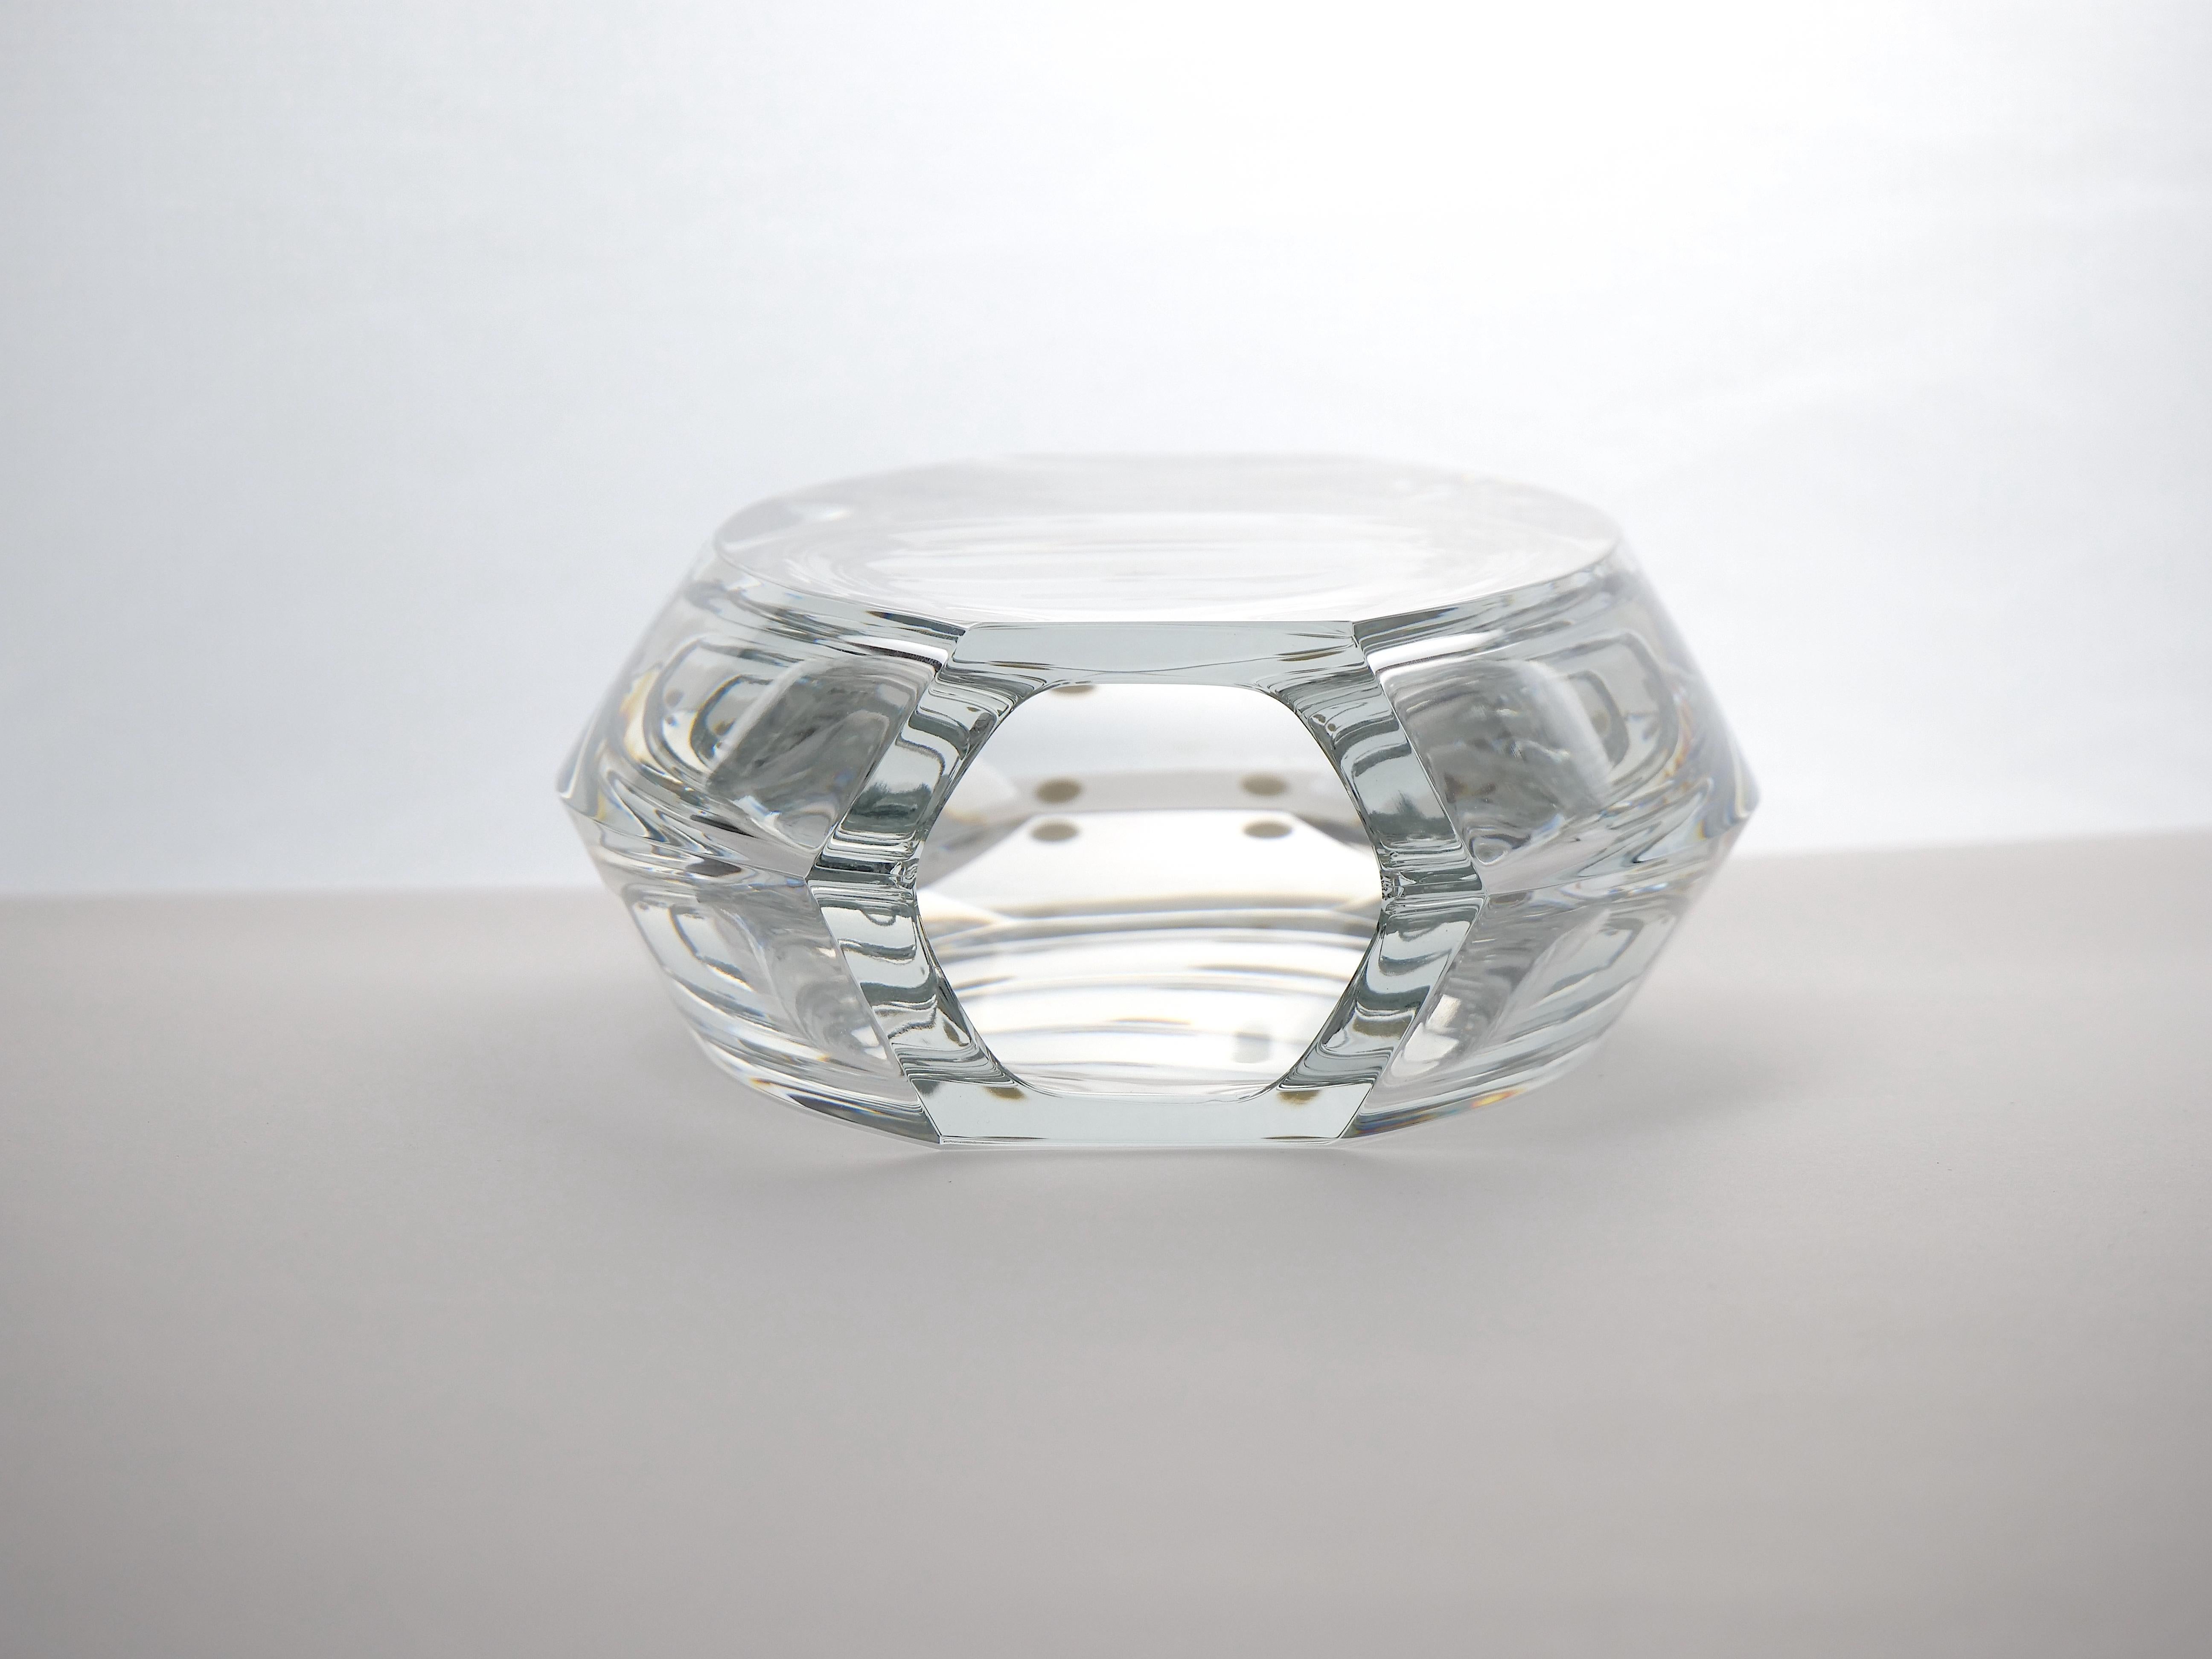 French Baccarat Crystal Art Deco Style Decorative Vase For Sale 2